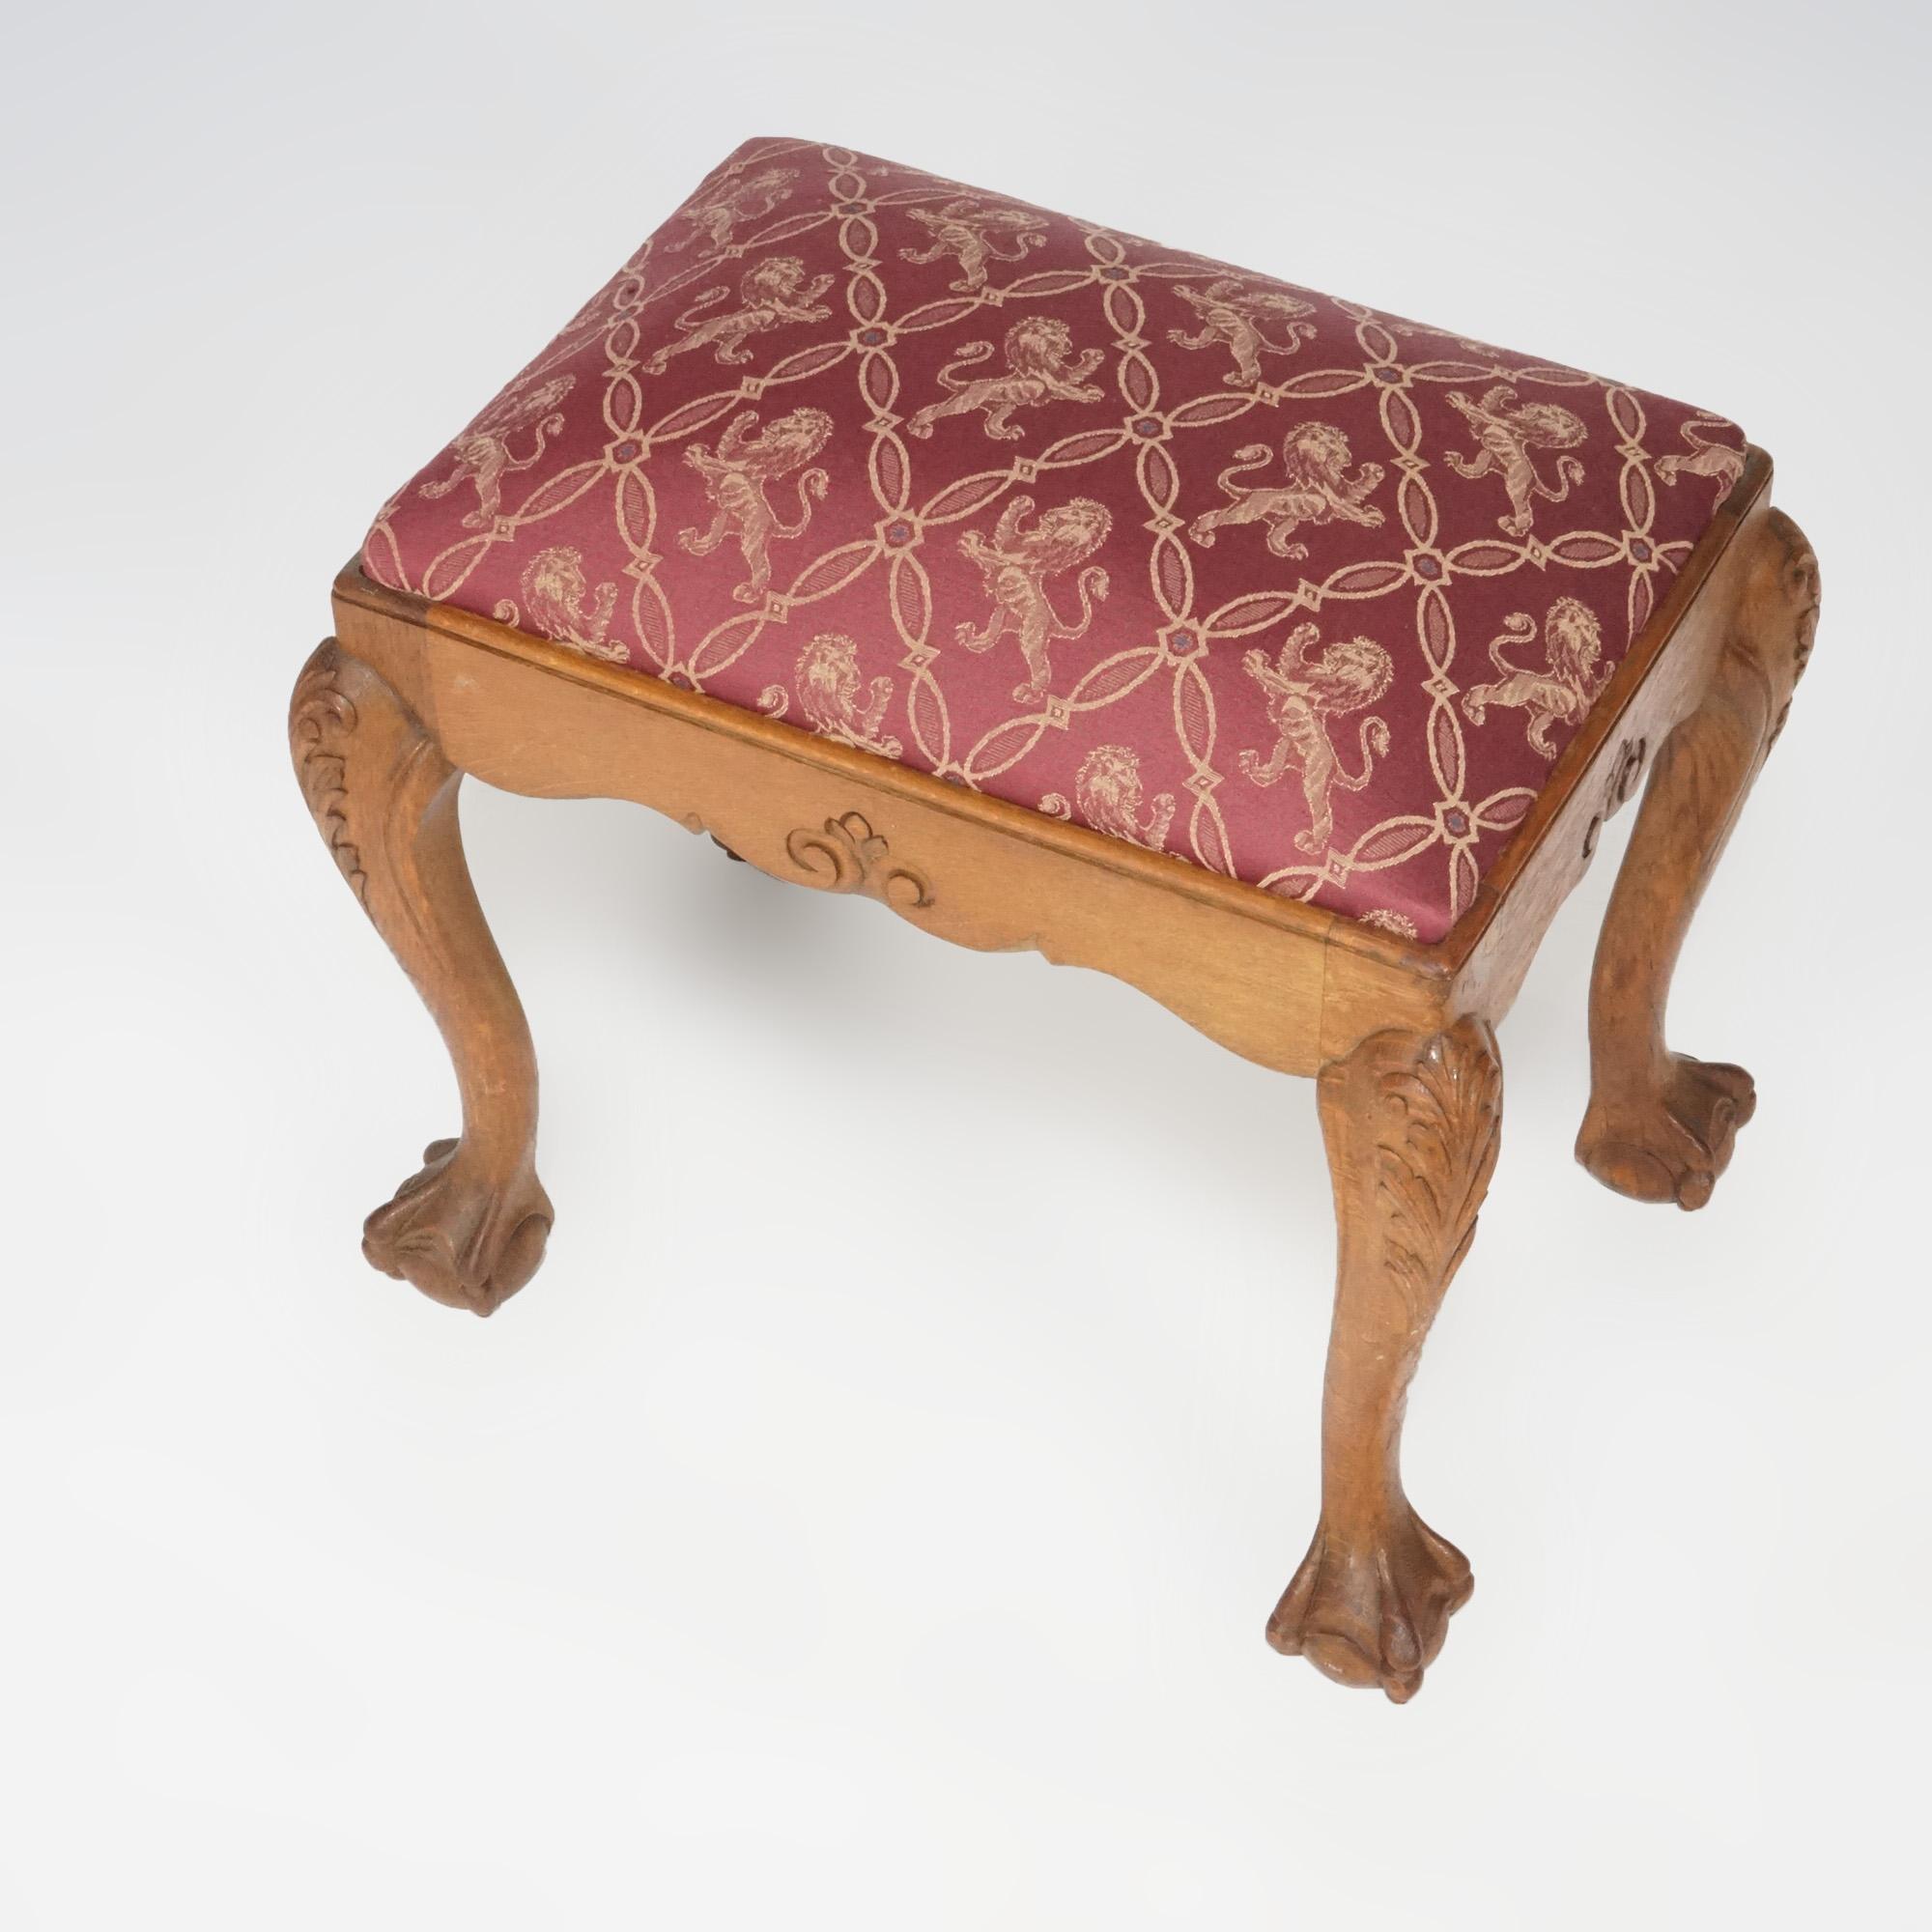 A Chippendale style bench offers upholstered seat over oak base with carved foliate elements, raised on cabriole legs having acanthus knees and terminating in claw and ball feet, 20th century

Measures- 19.5''H x 21.25''W x 15.25''D.